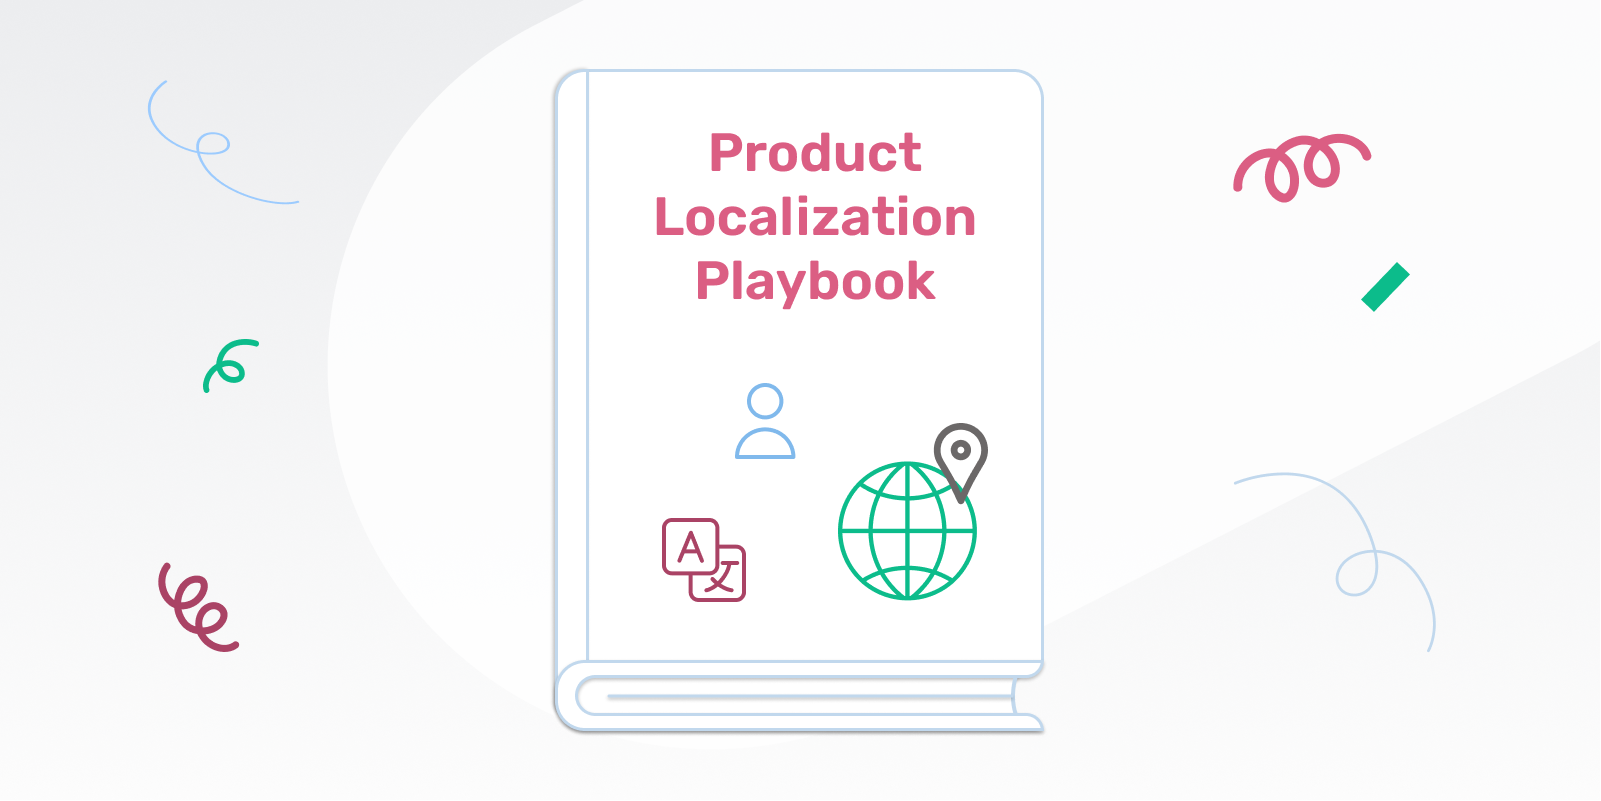 Product Localization Playbook